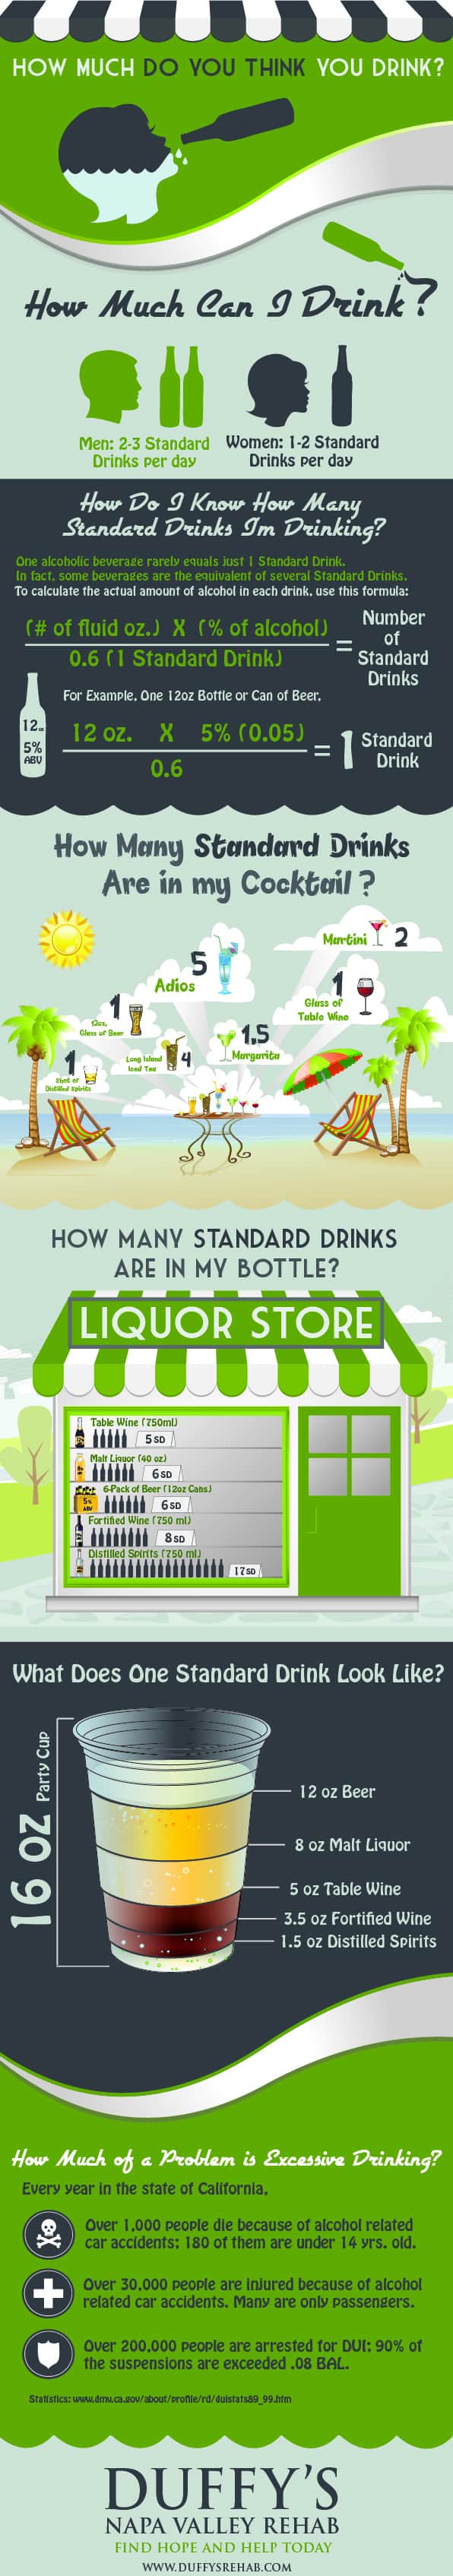 Thinking about Drinking Infographic